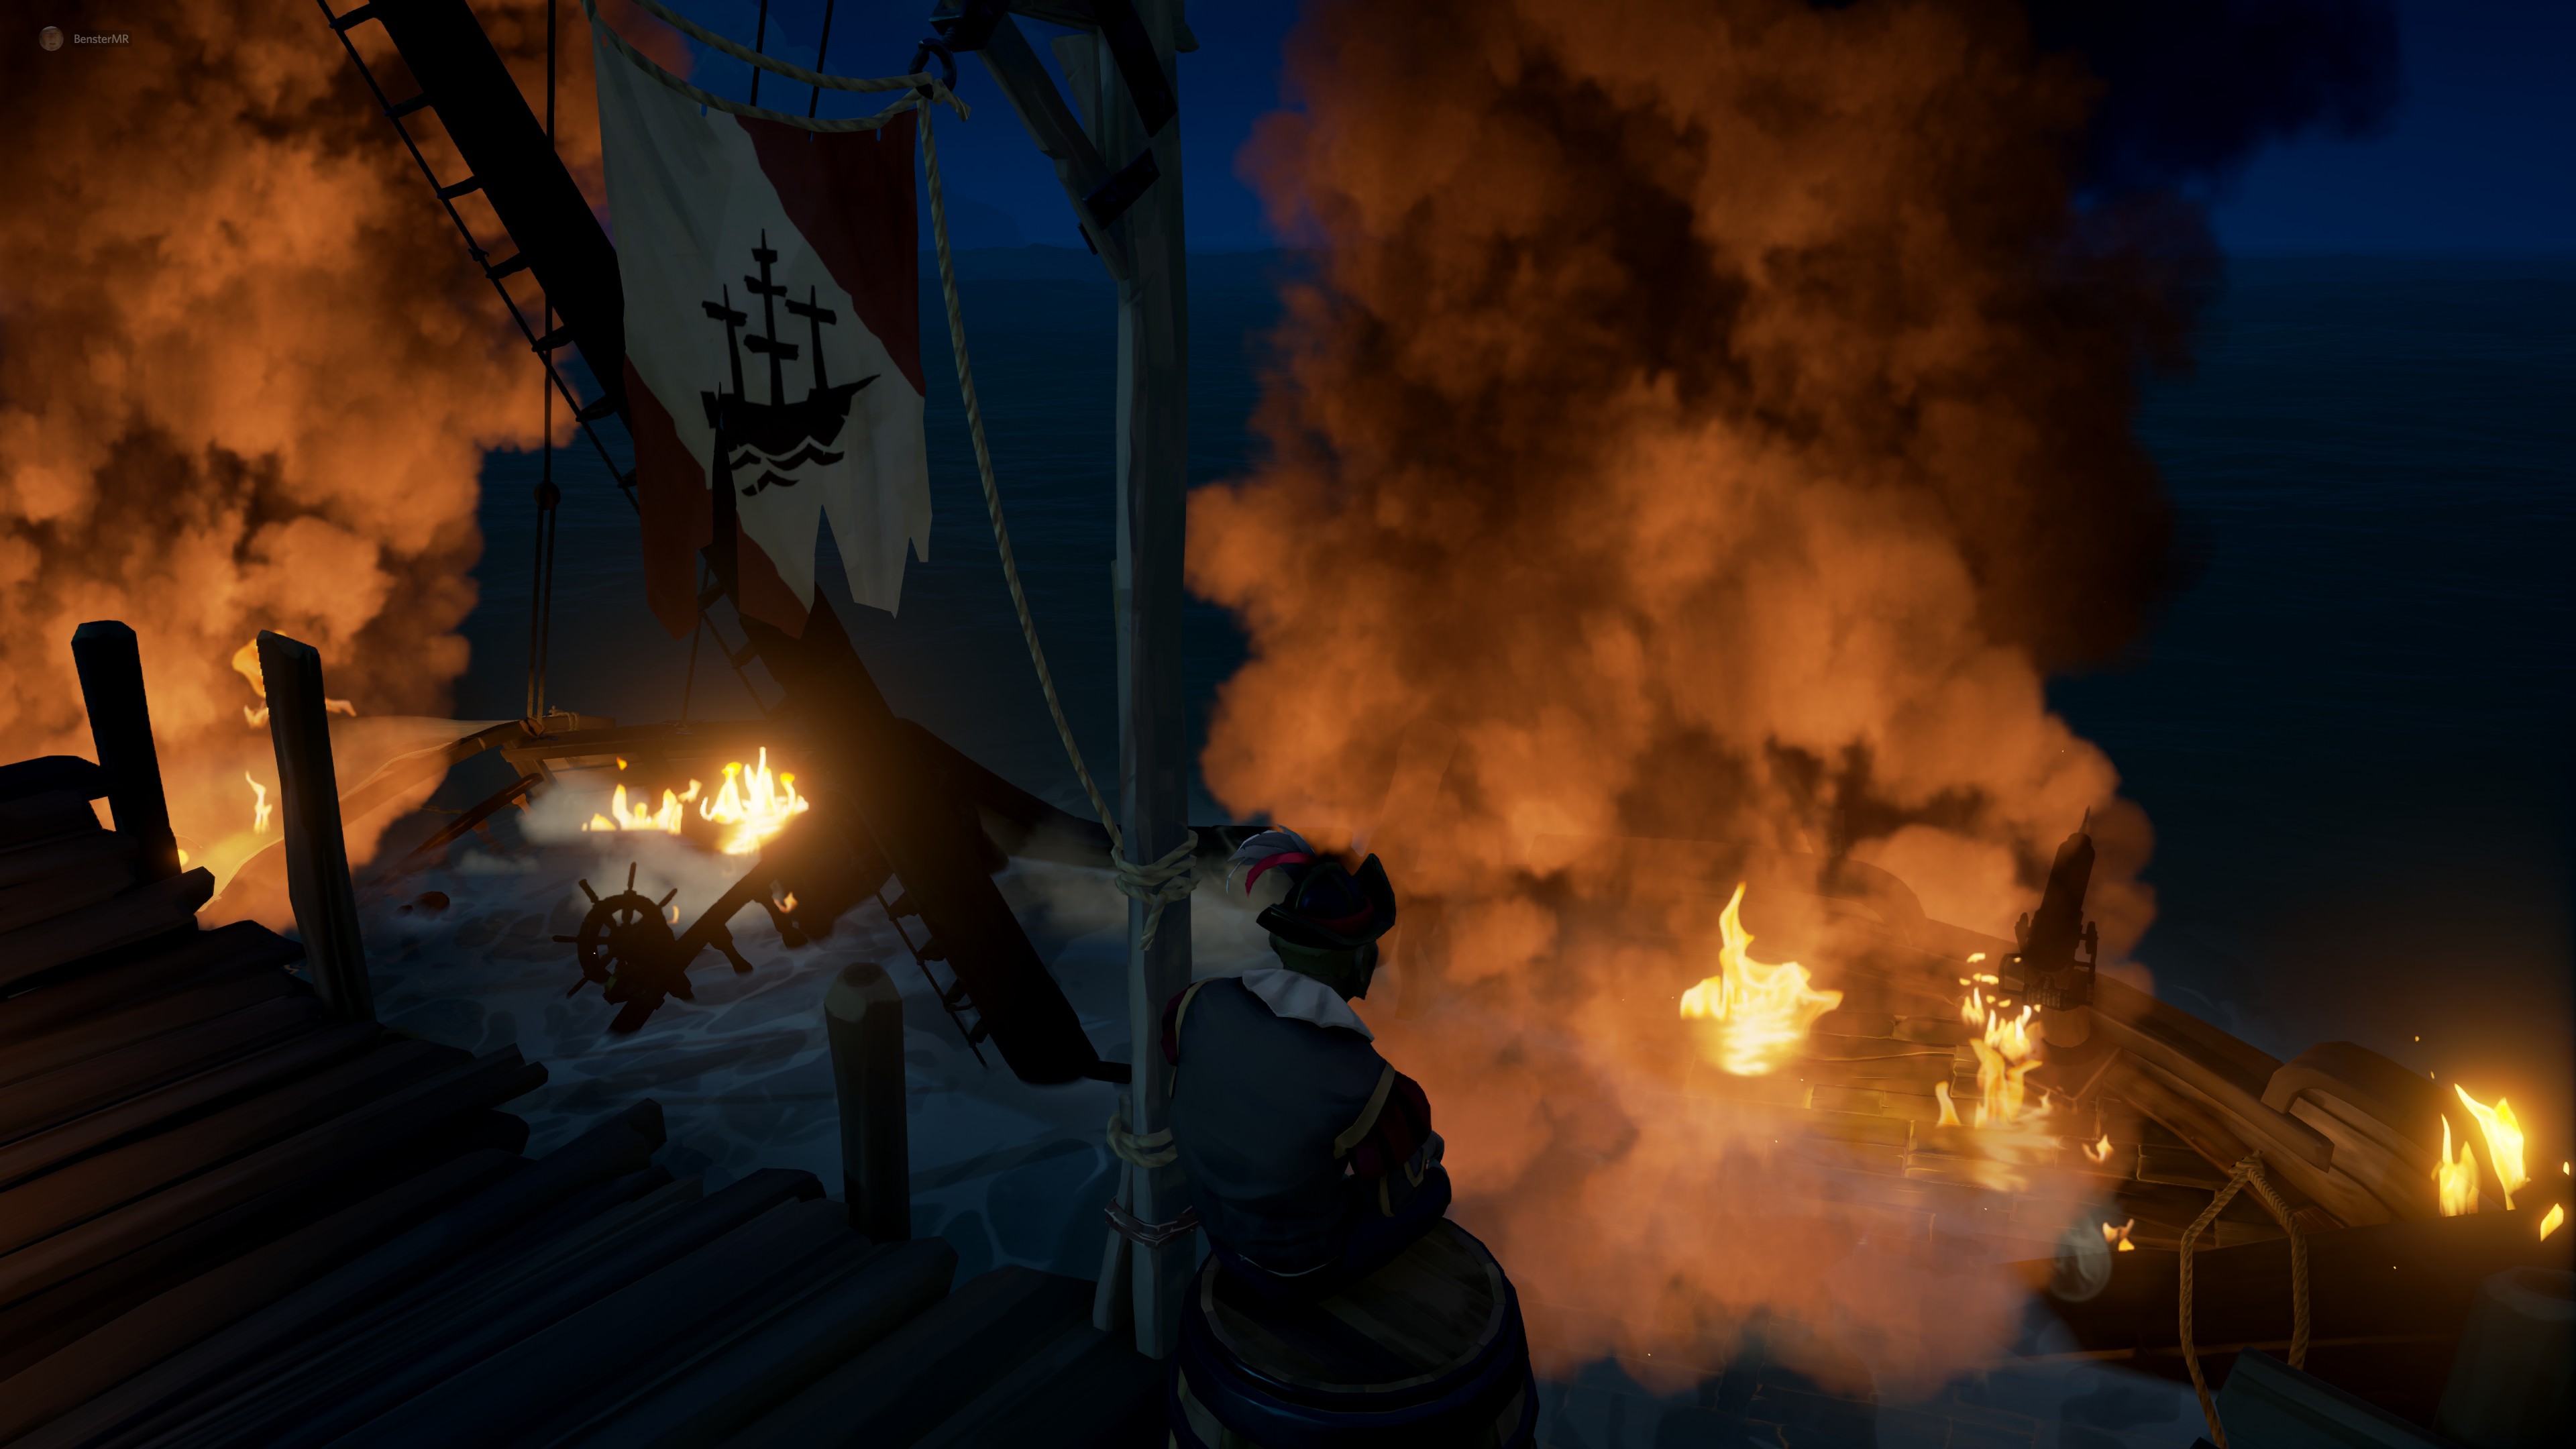 Sea of Thieves - How to Easy Extinguish the Fires on Ship/Boat - Step 2: Let the water flow - 6D6E5F3